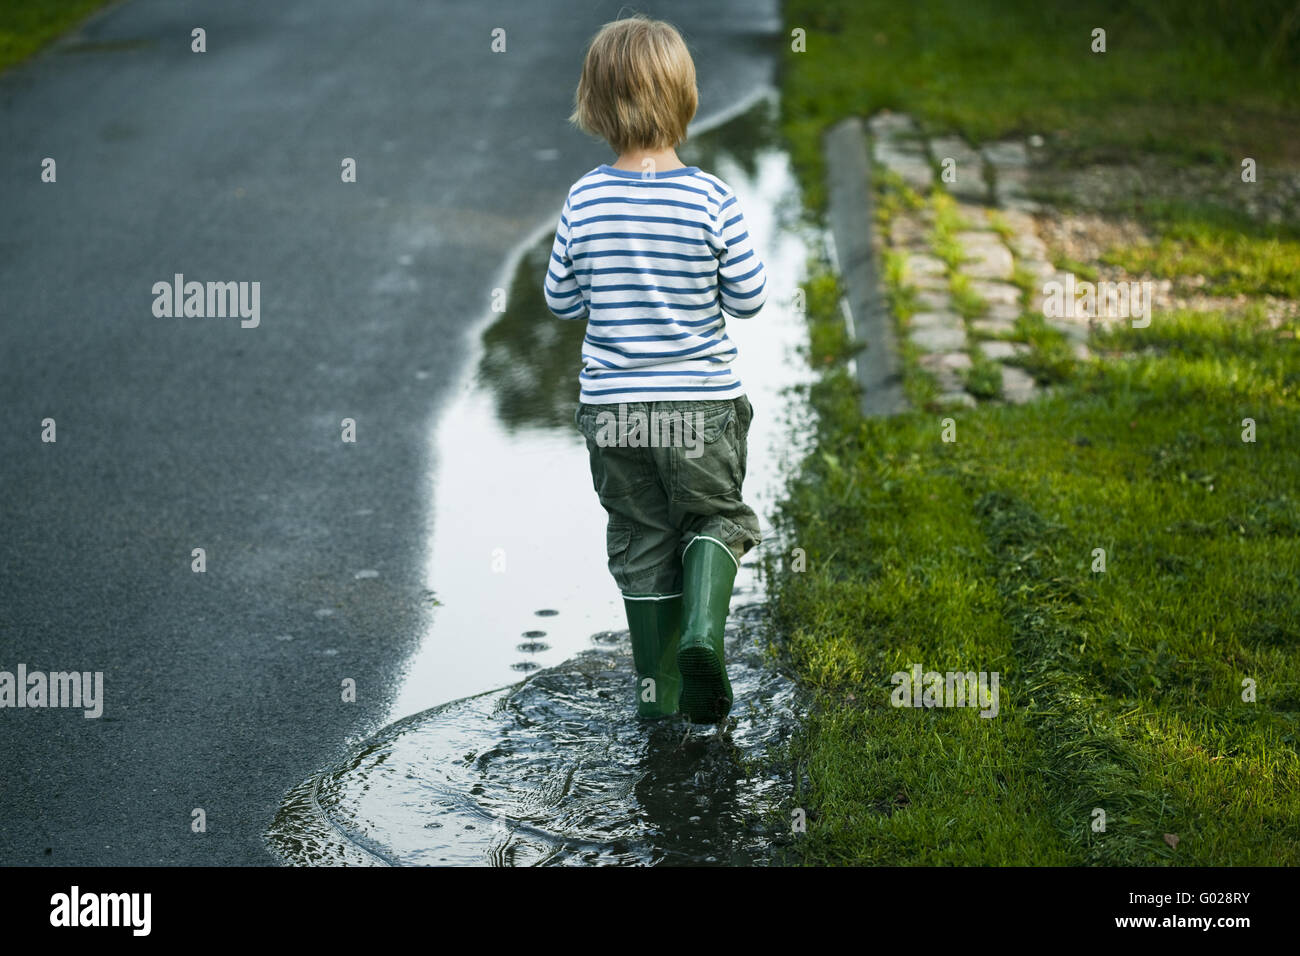 Boy in a puddle Stock Photo